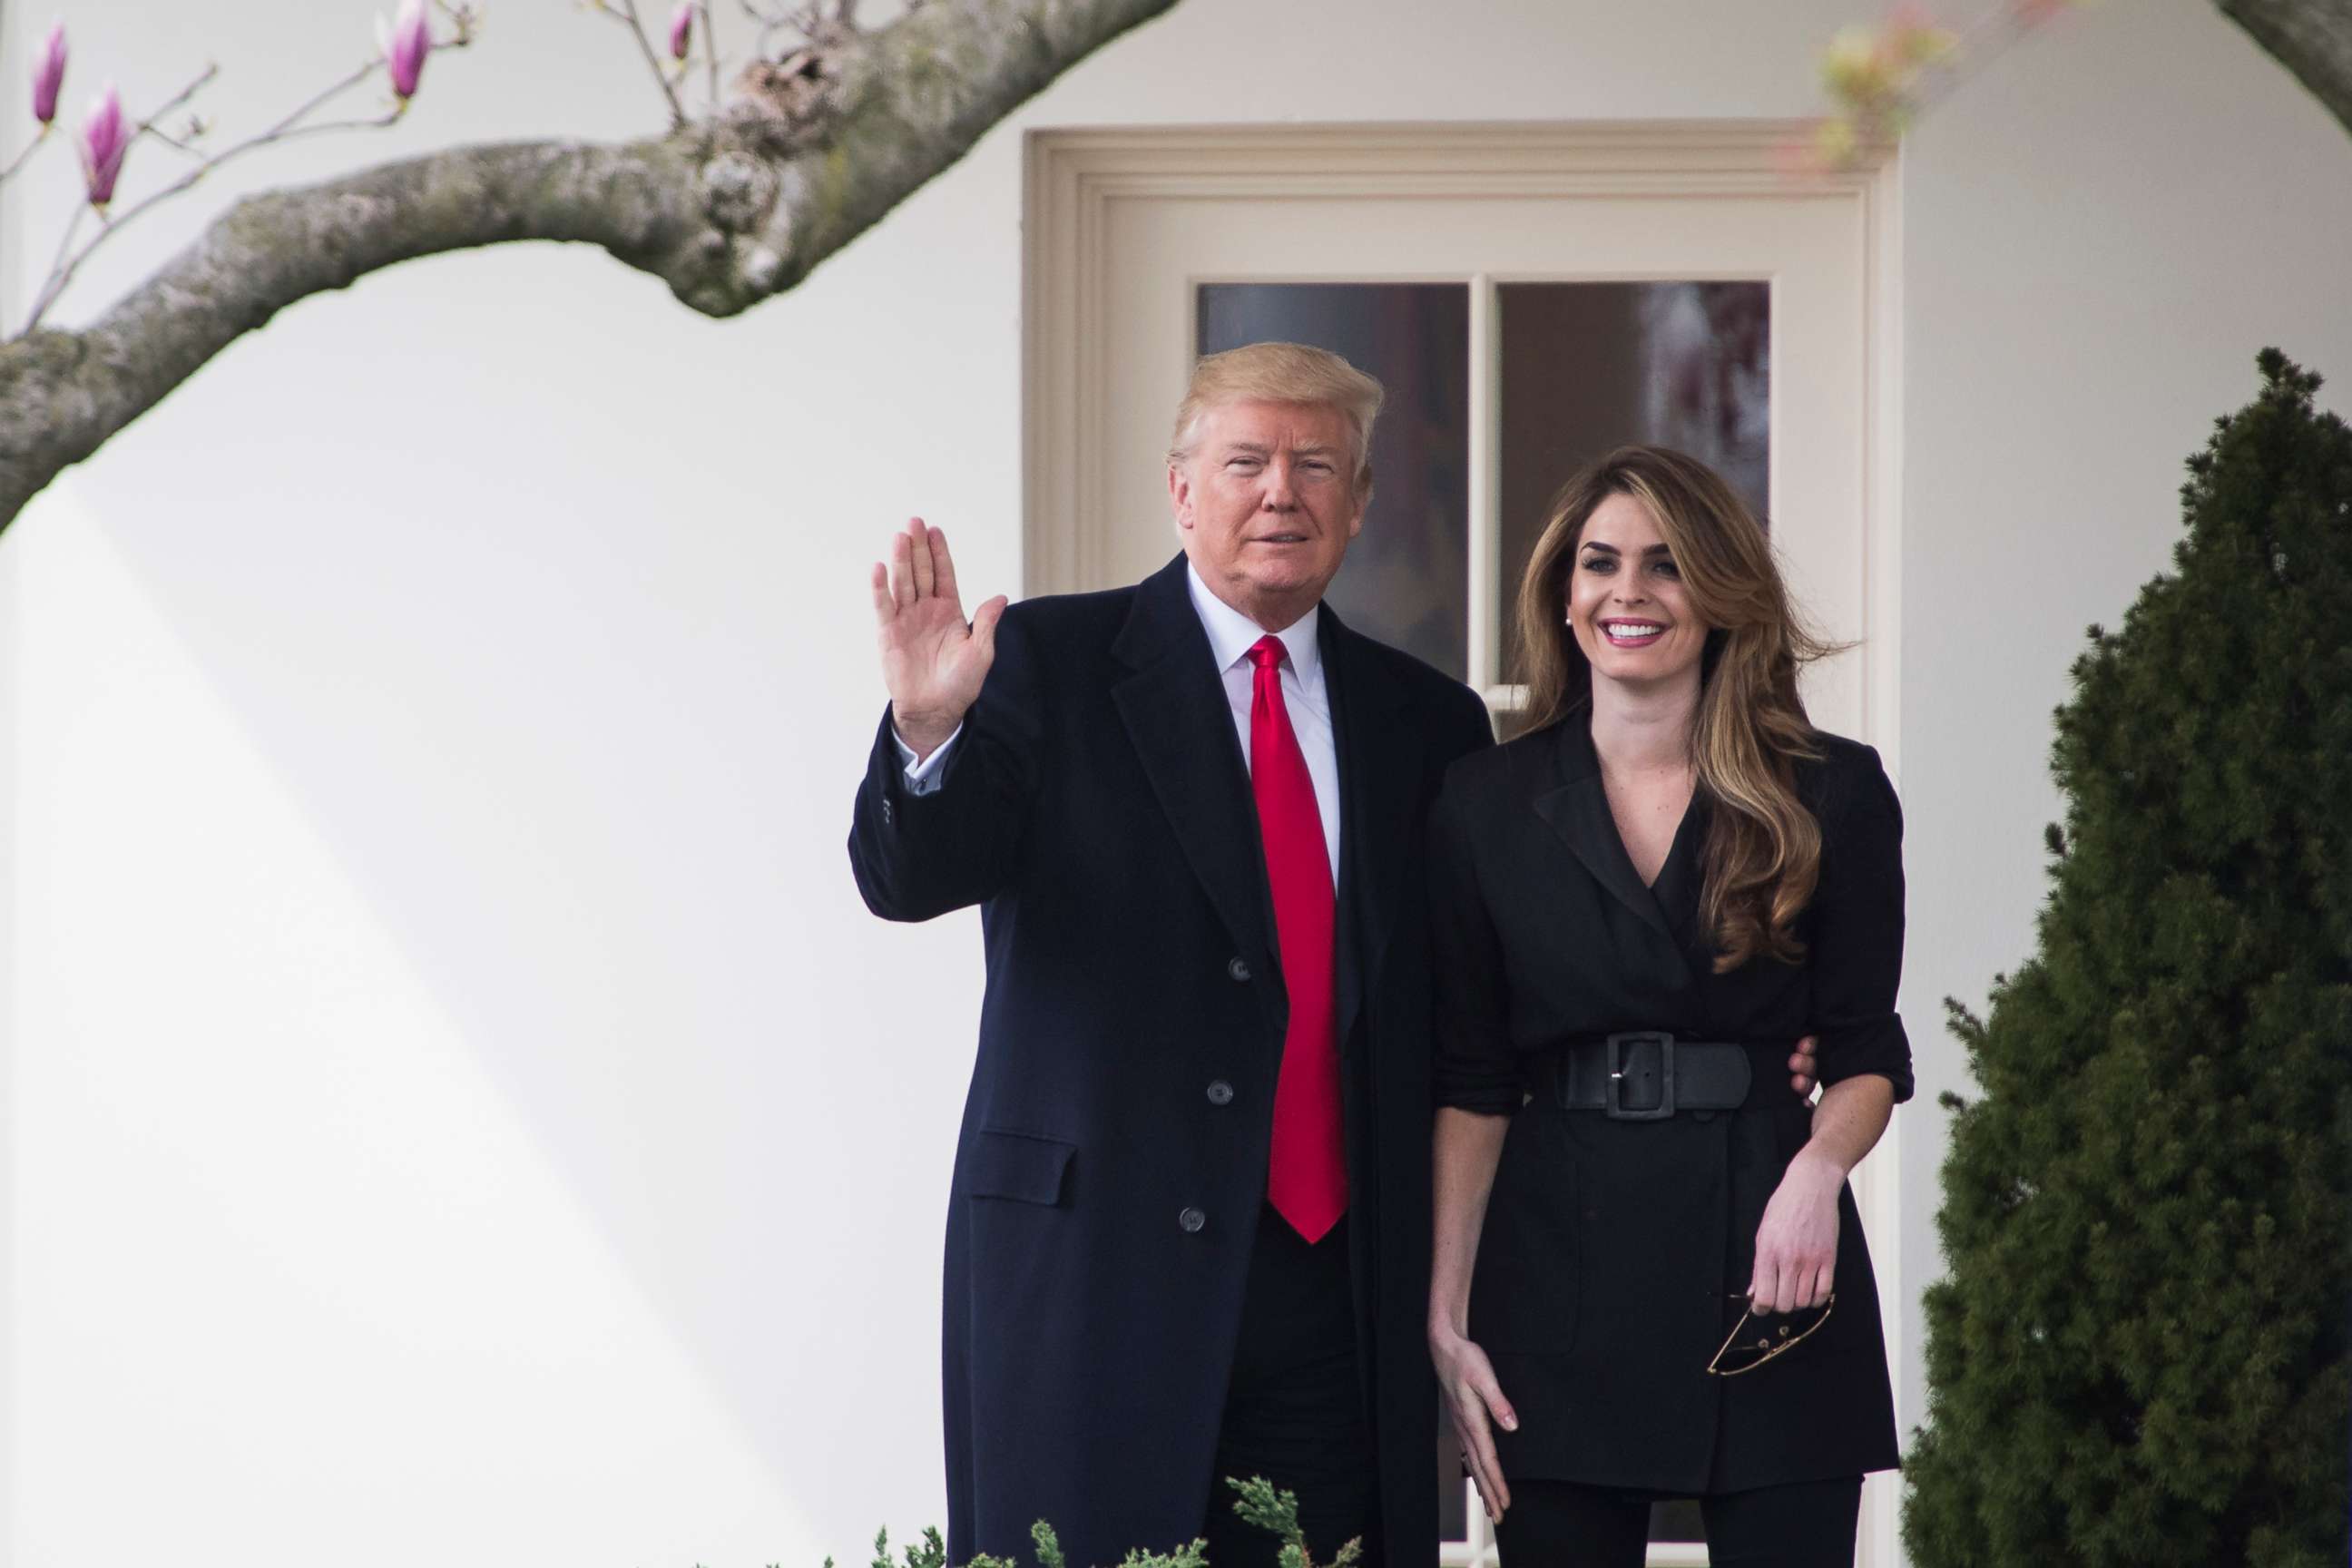 PHOTO: President Donald J. Trump waves to the press beside White House Communications Director Hope Hicks as he walks from the Oval Office of the White House to board Marine One, March 29, 2018.